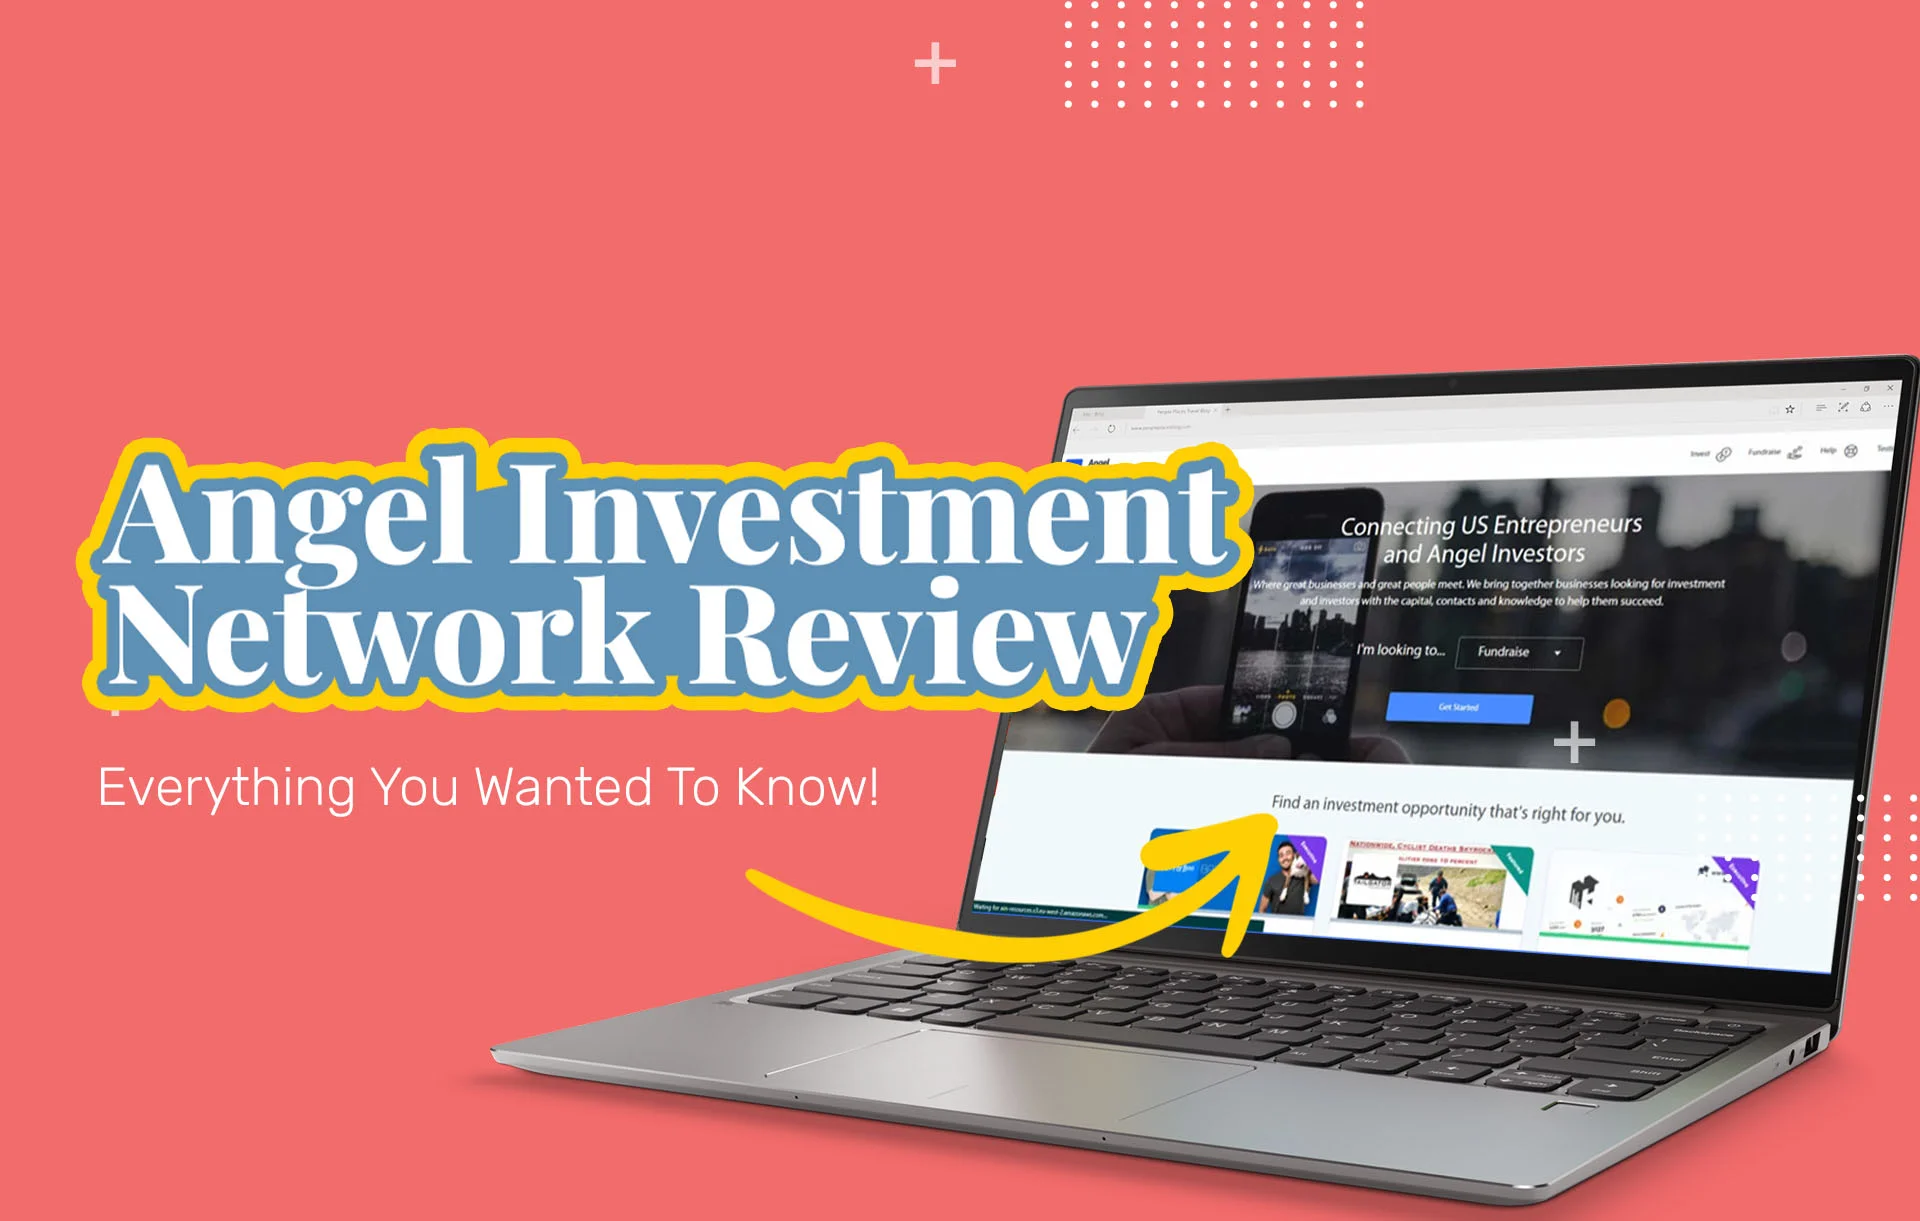 Angel Investment Network Reviews: Everything You Wanted To Know!